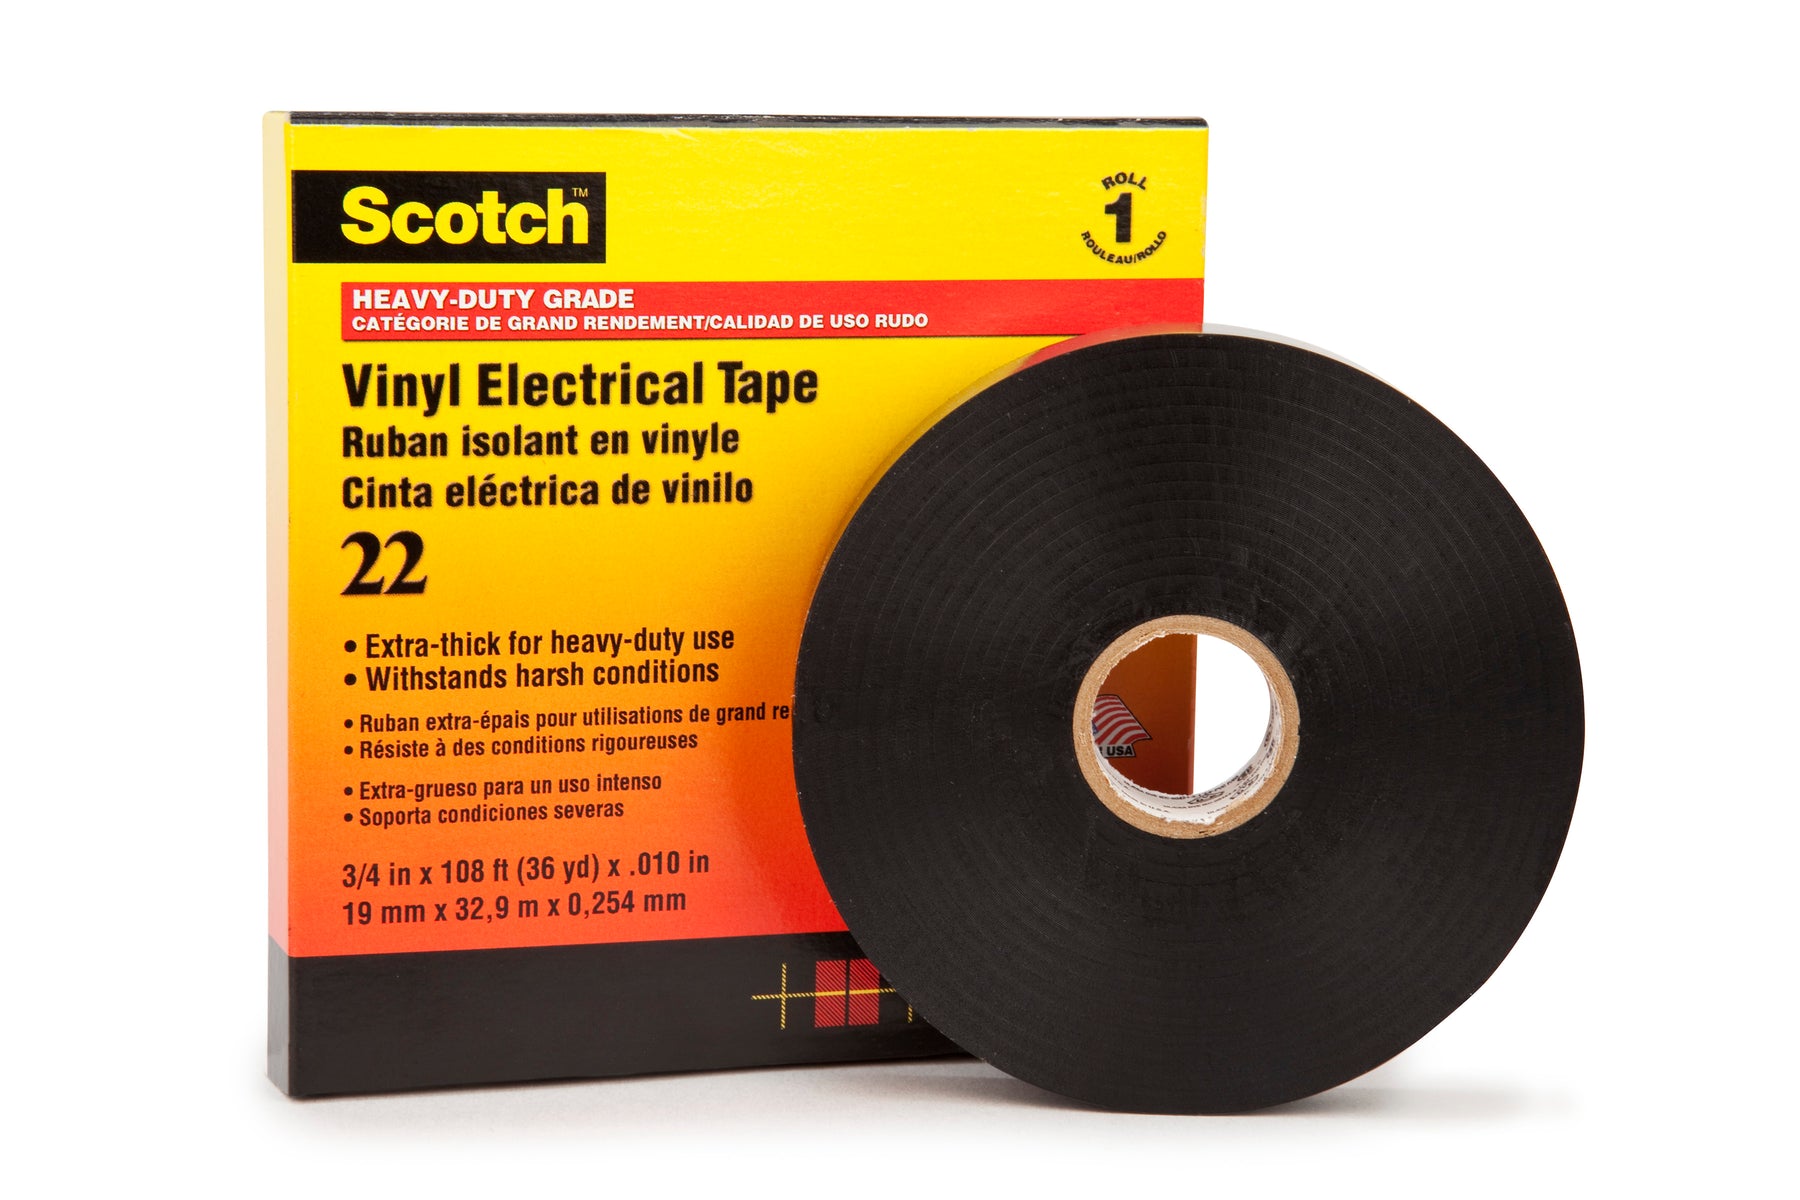 Electrical Tapes 3M 22-1-1/2X36 Heavy Duty Vinyl Electrical Tape 22 in Black (10 mil x 1-1/2 Inch x 108 ft)